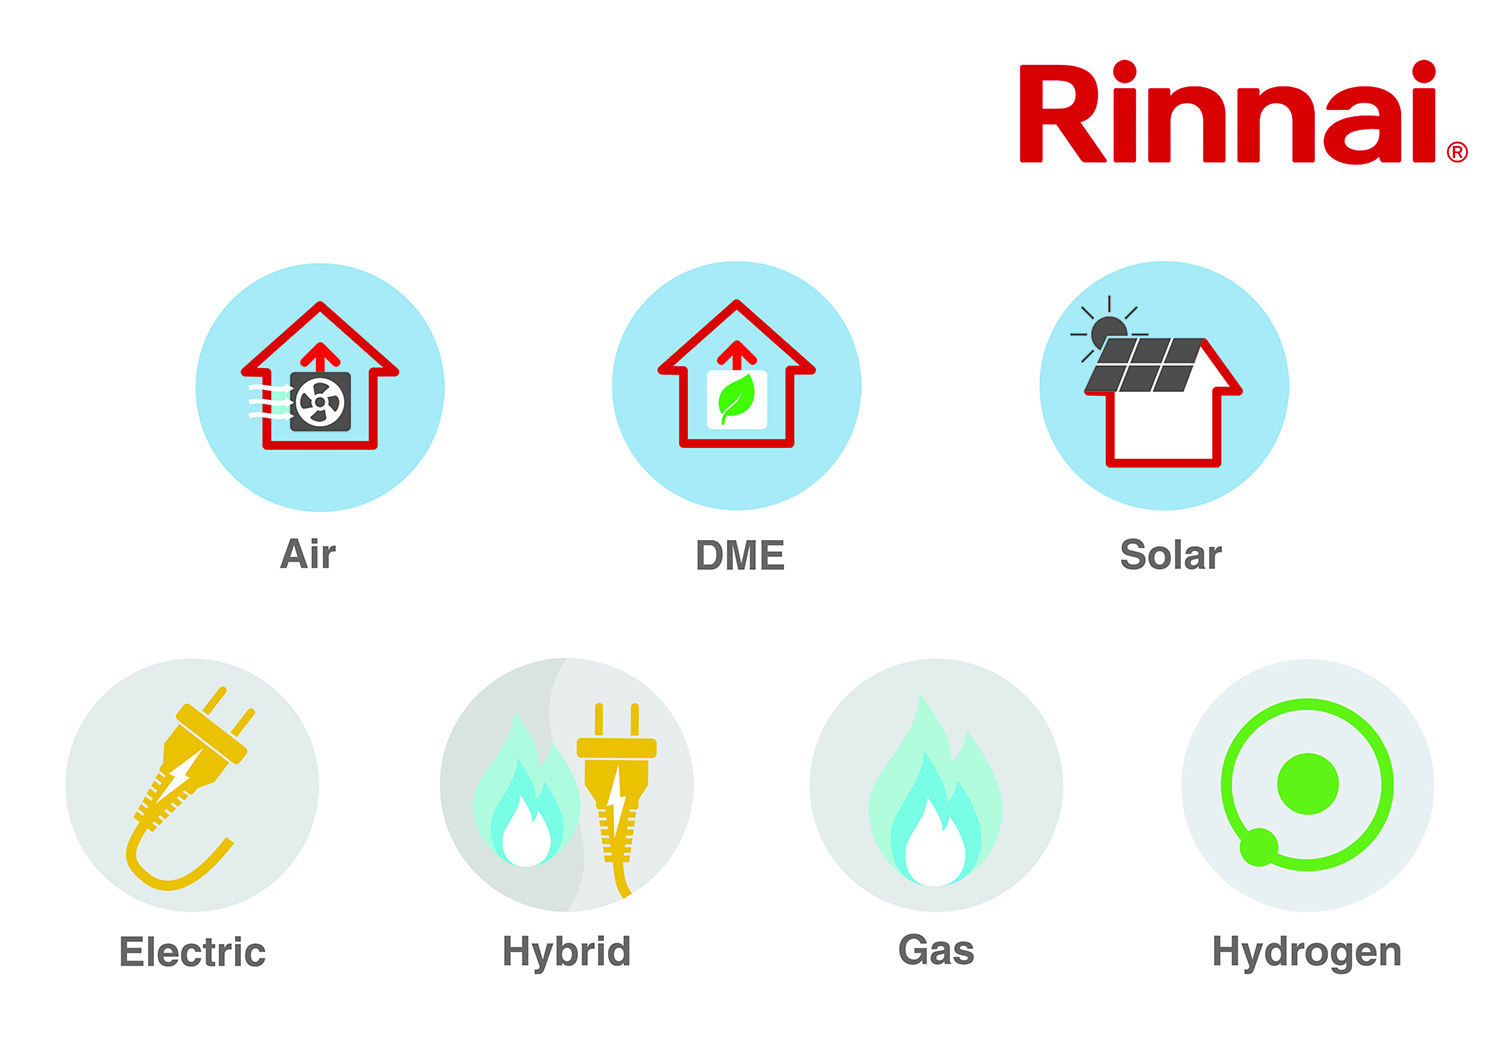 Rinnai Goes Electric On Water Heating Products To Existing Natural Gas, Hydrogen Blends Ready and BioLPG Units